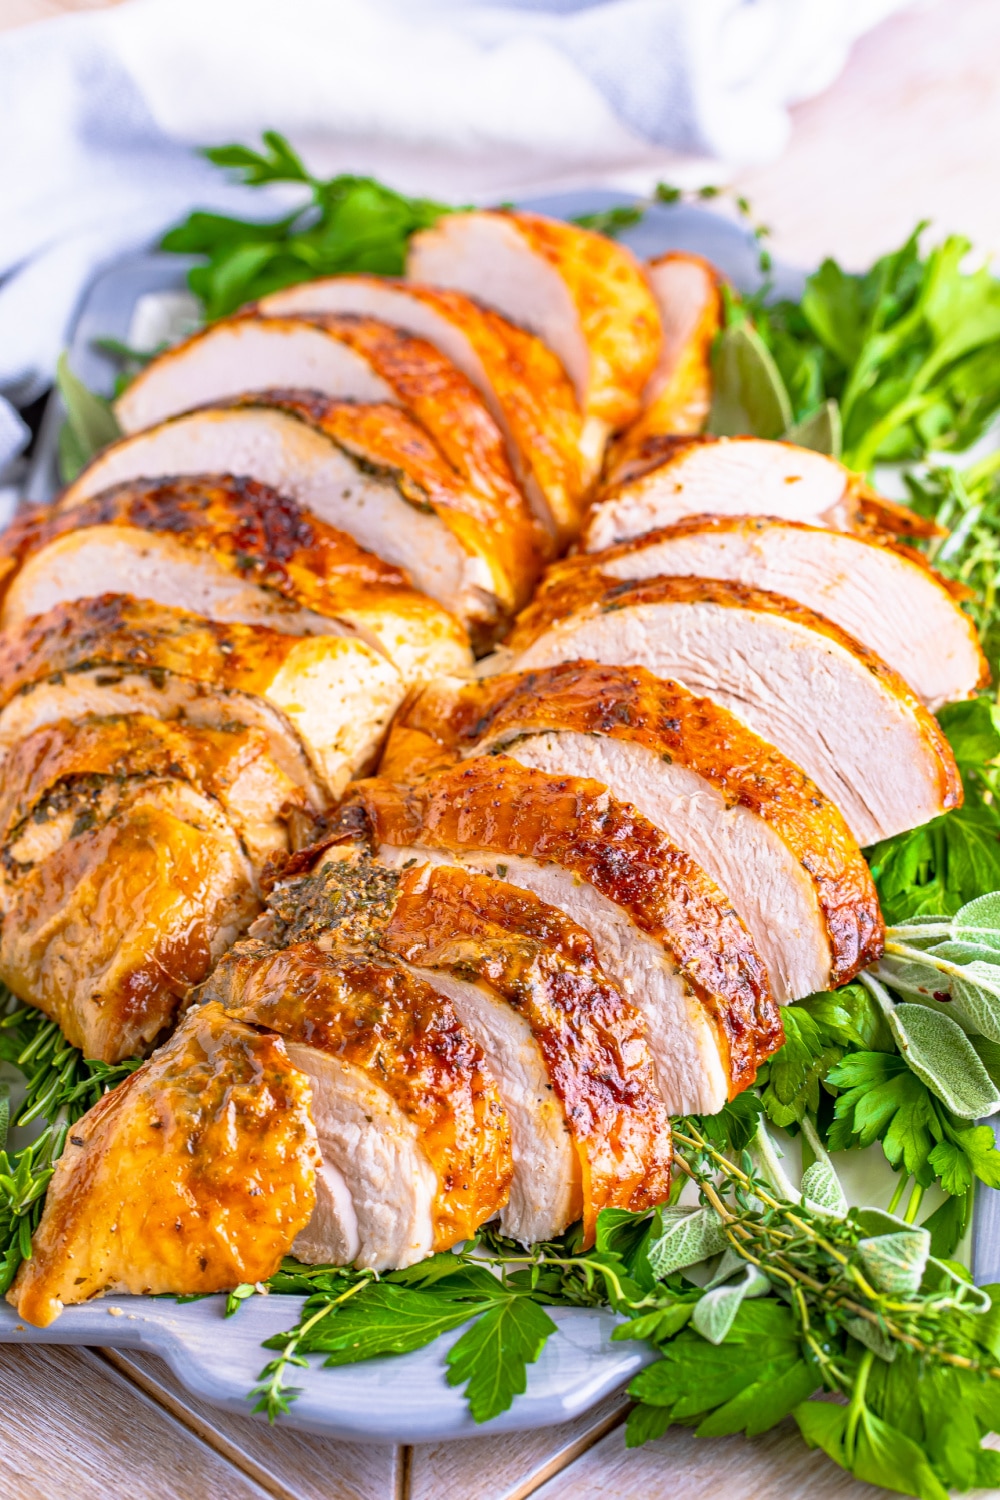 A turkey breast that has been sliced lays on a bed of greens.